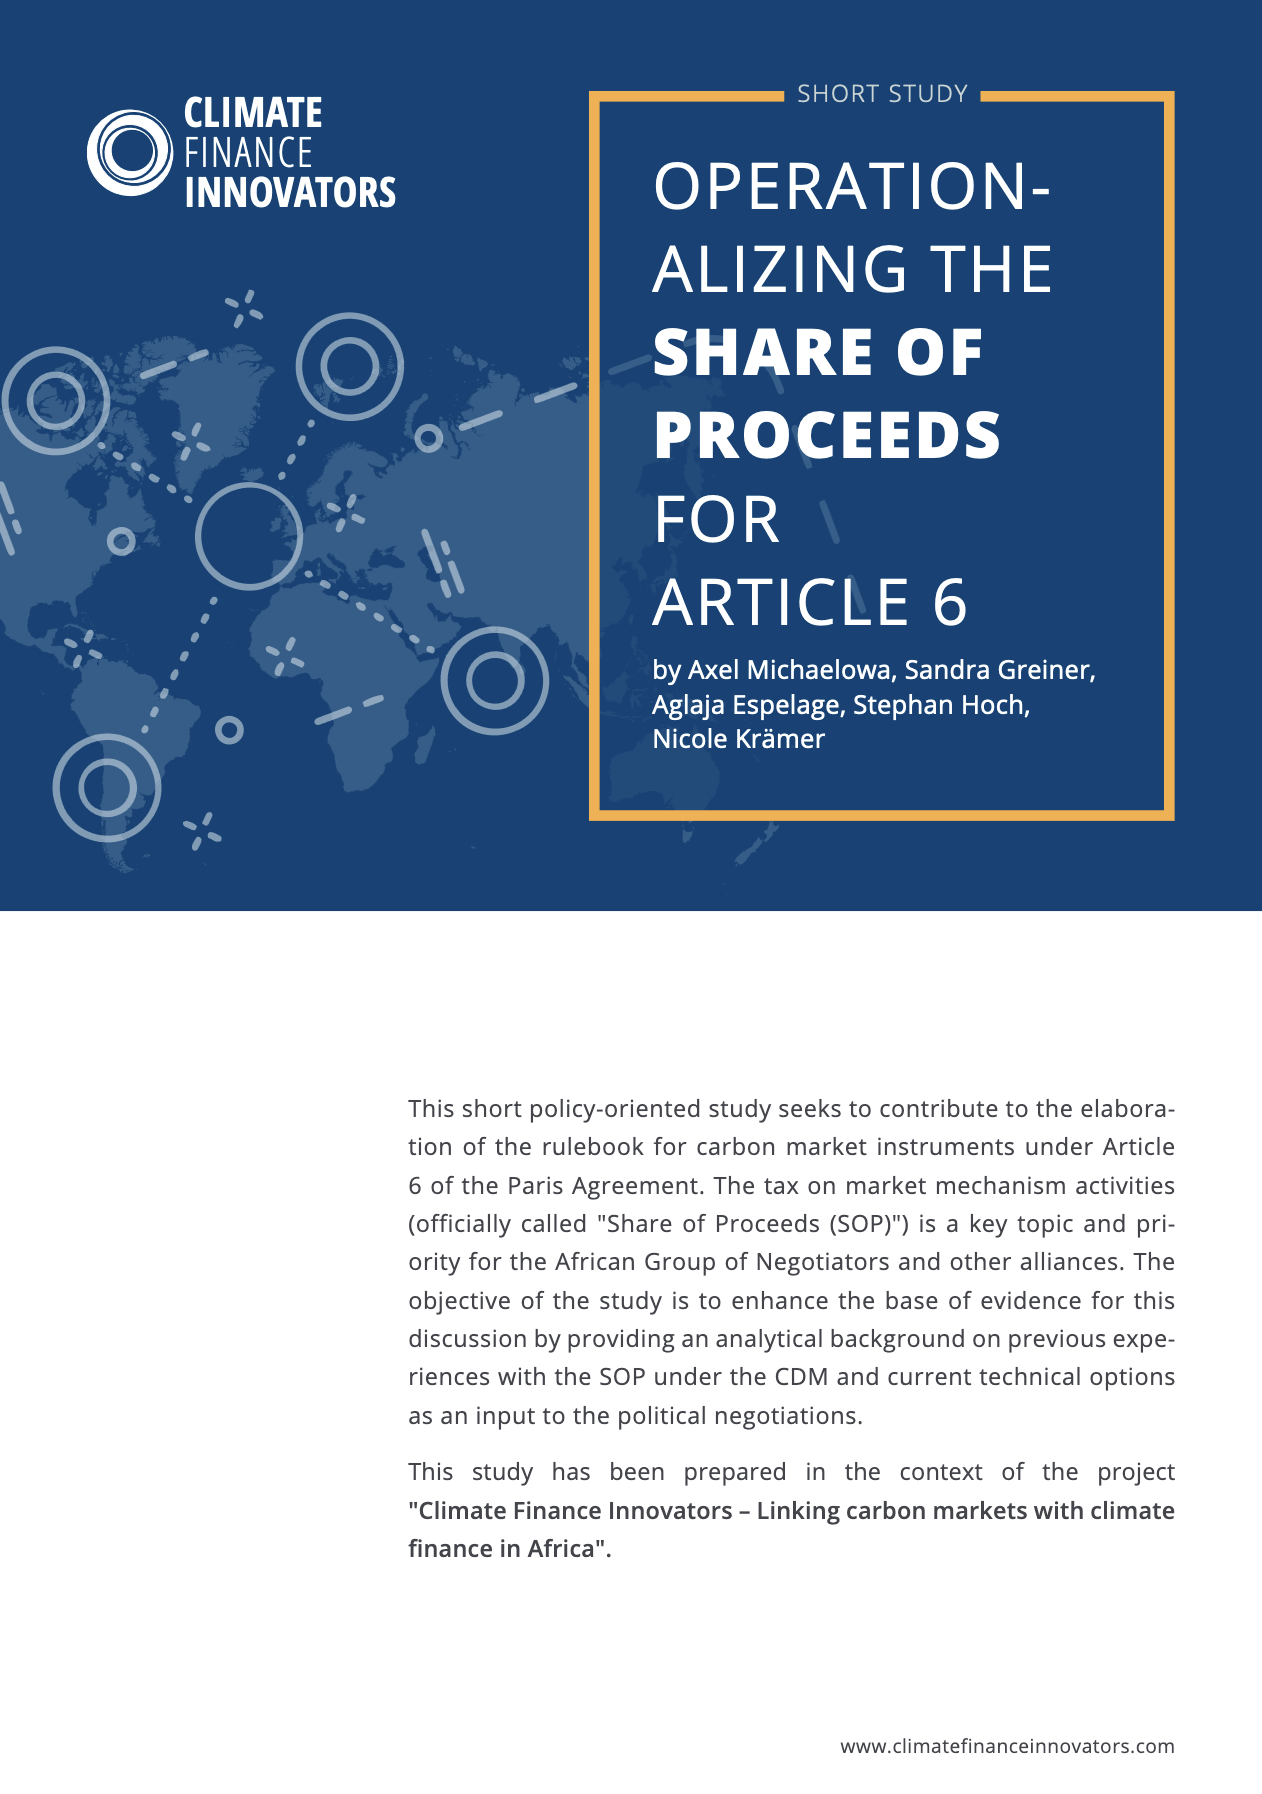 Operationalizing the share of proceeds for Article 6